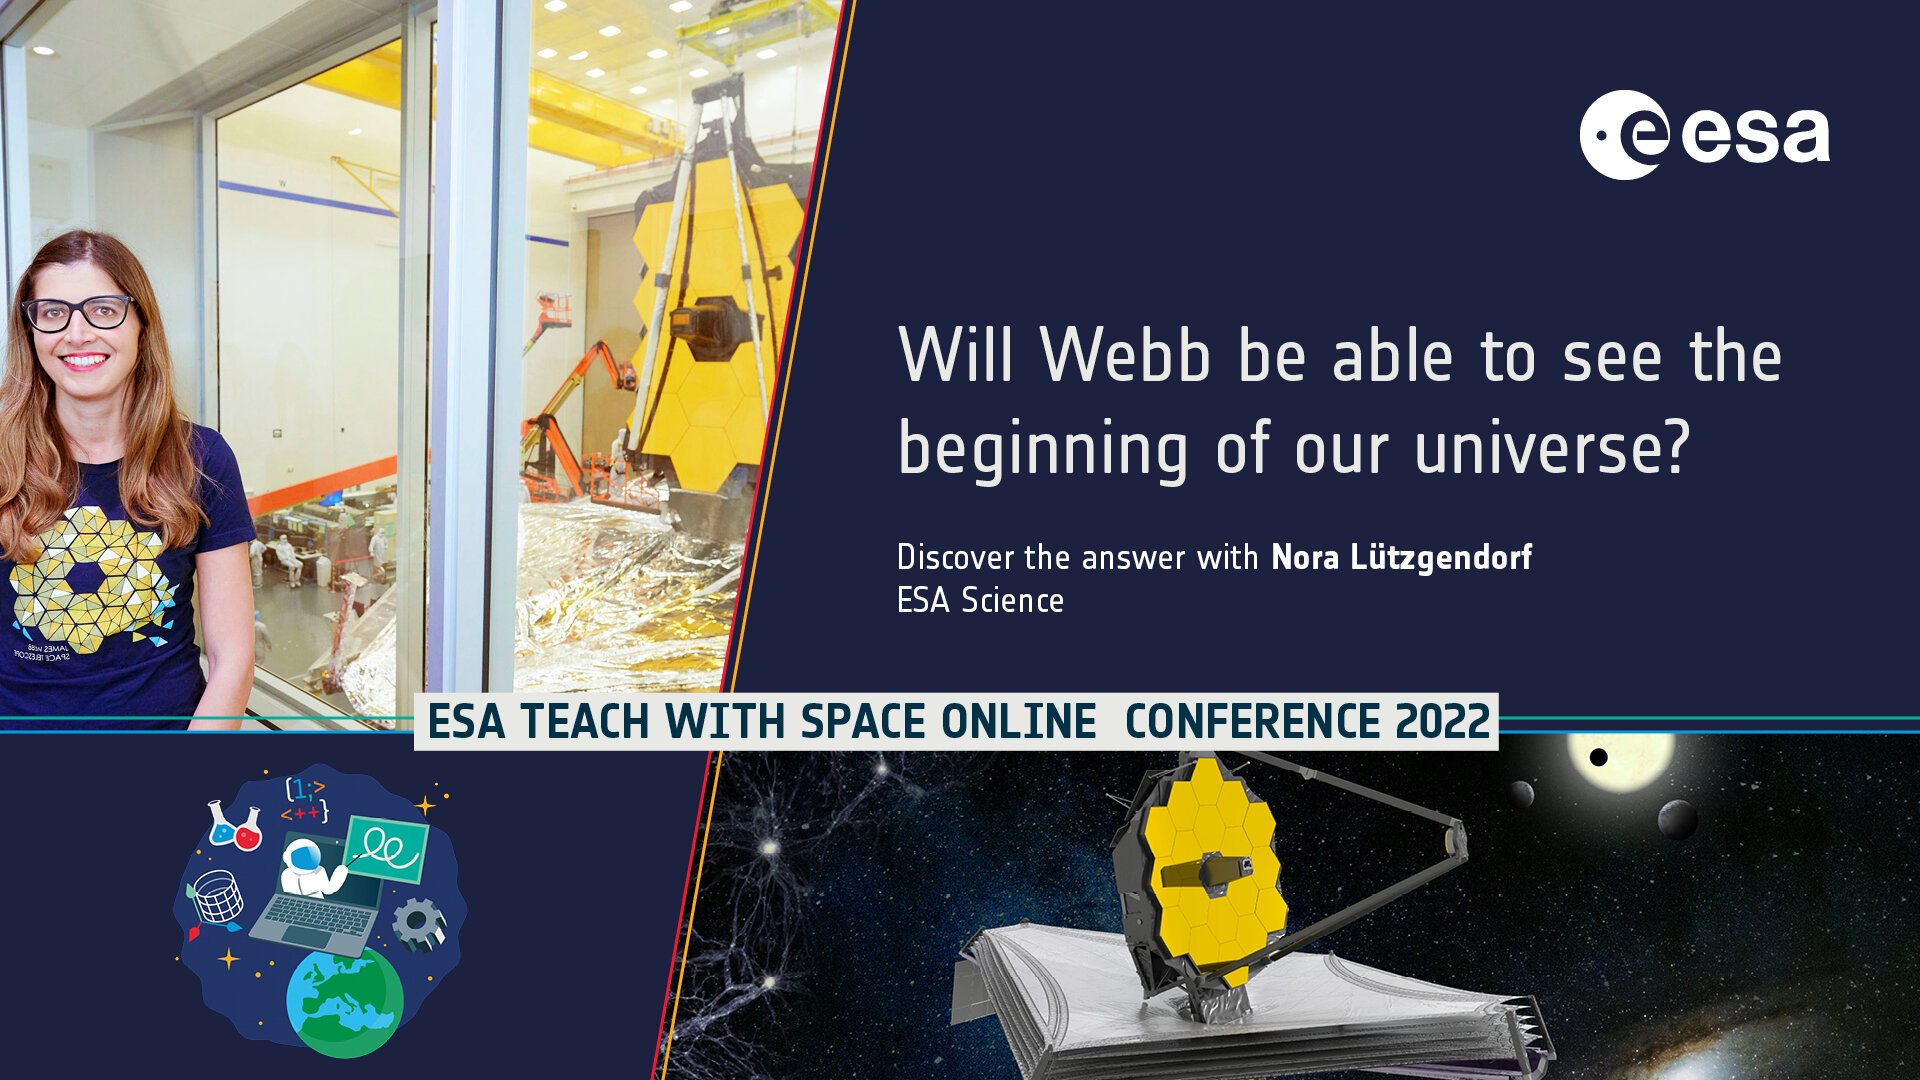 Nora Lützgendorf is the key-note speaker for the "Webb: a mind-blowing mission to the early universe" plenary during ESA 's Teach with Space Online Conference 2022